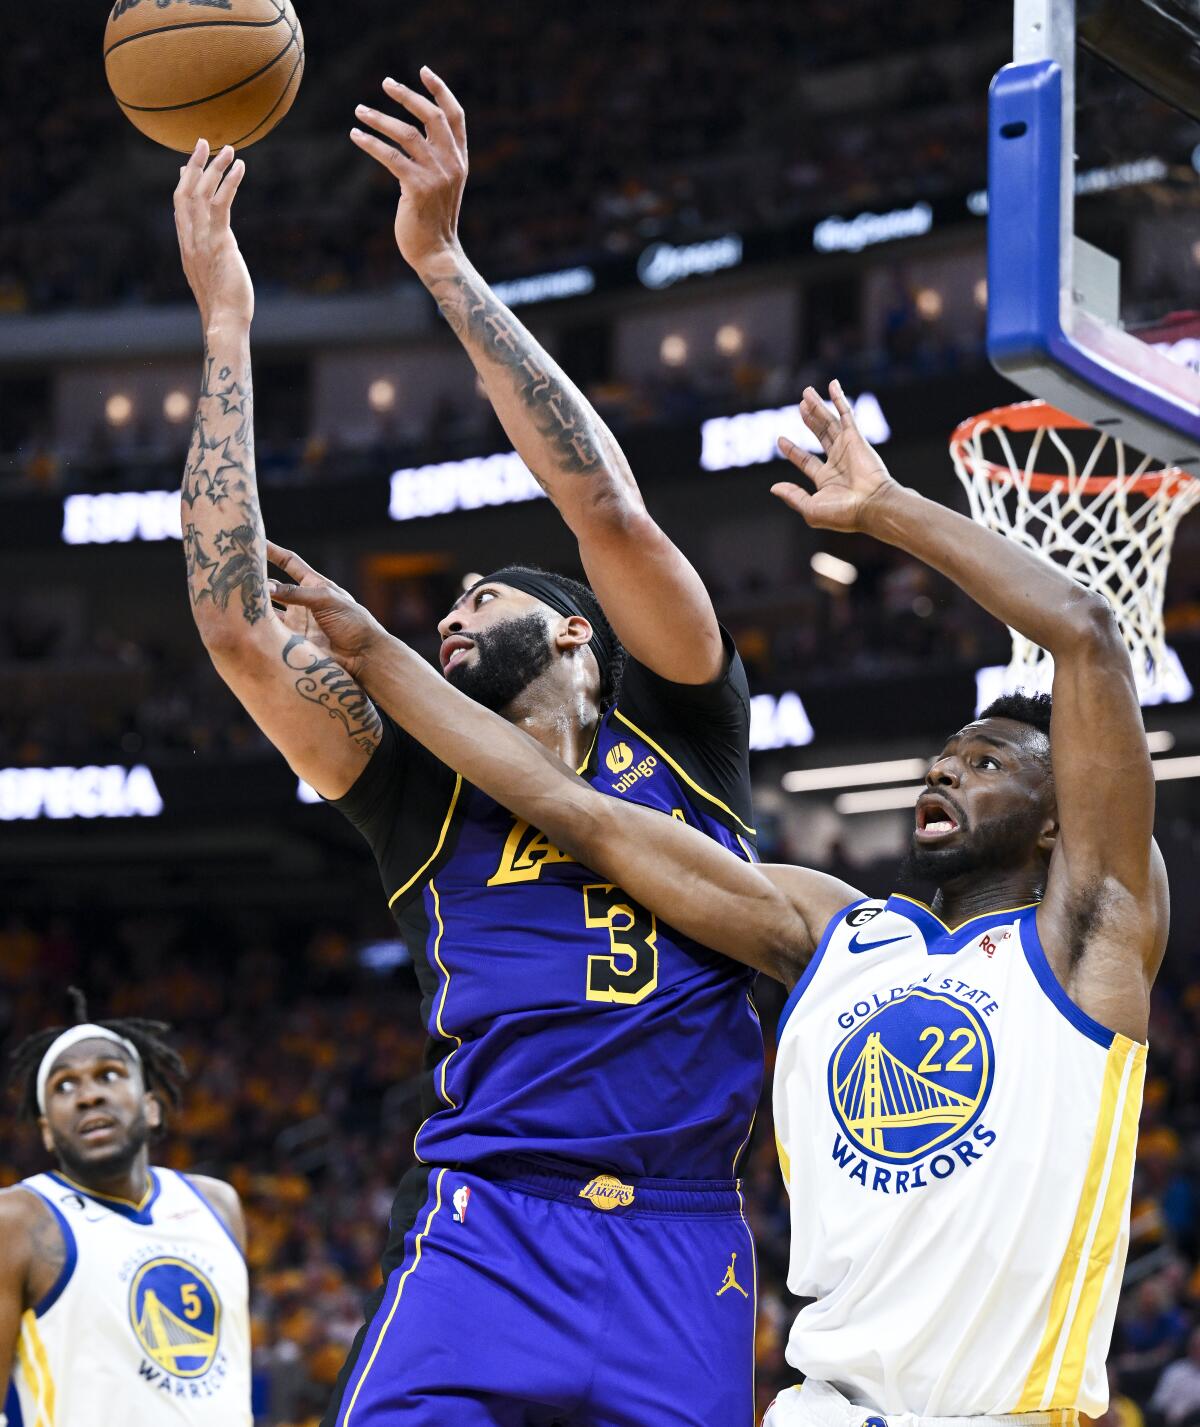 Forwards Anthony Davis of the Lakers and Andrew Wiggins of the Warriors battle for a rebound in Game 2.